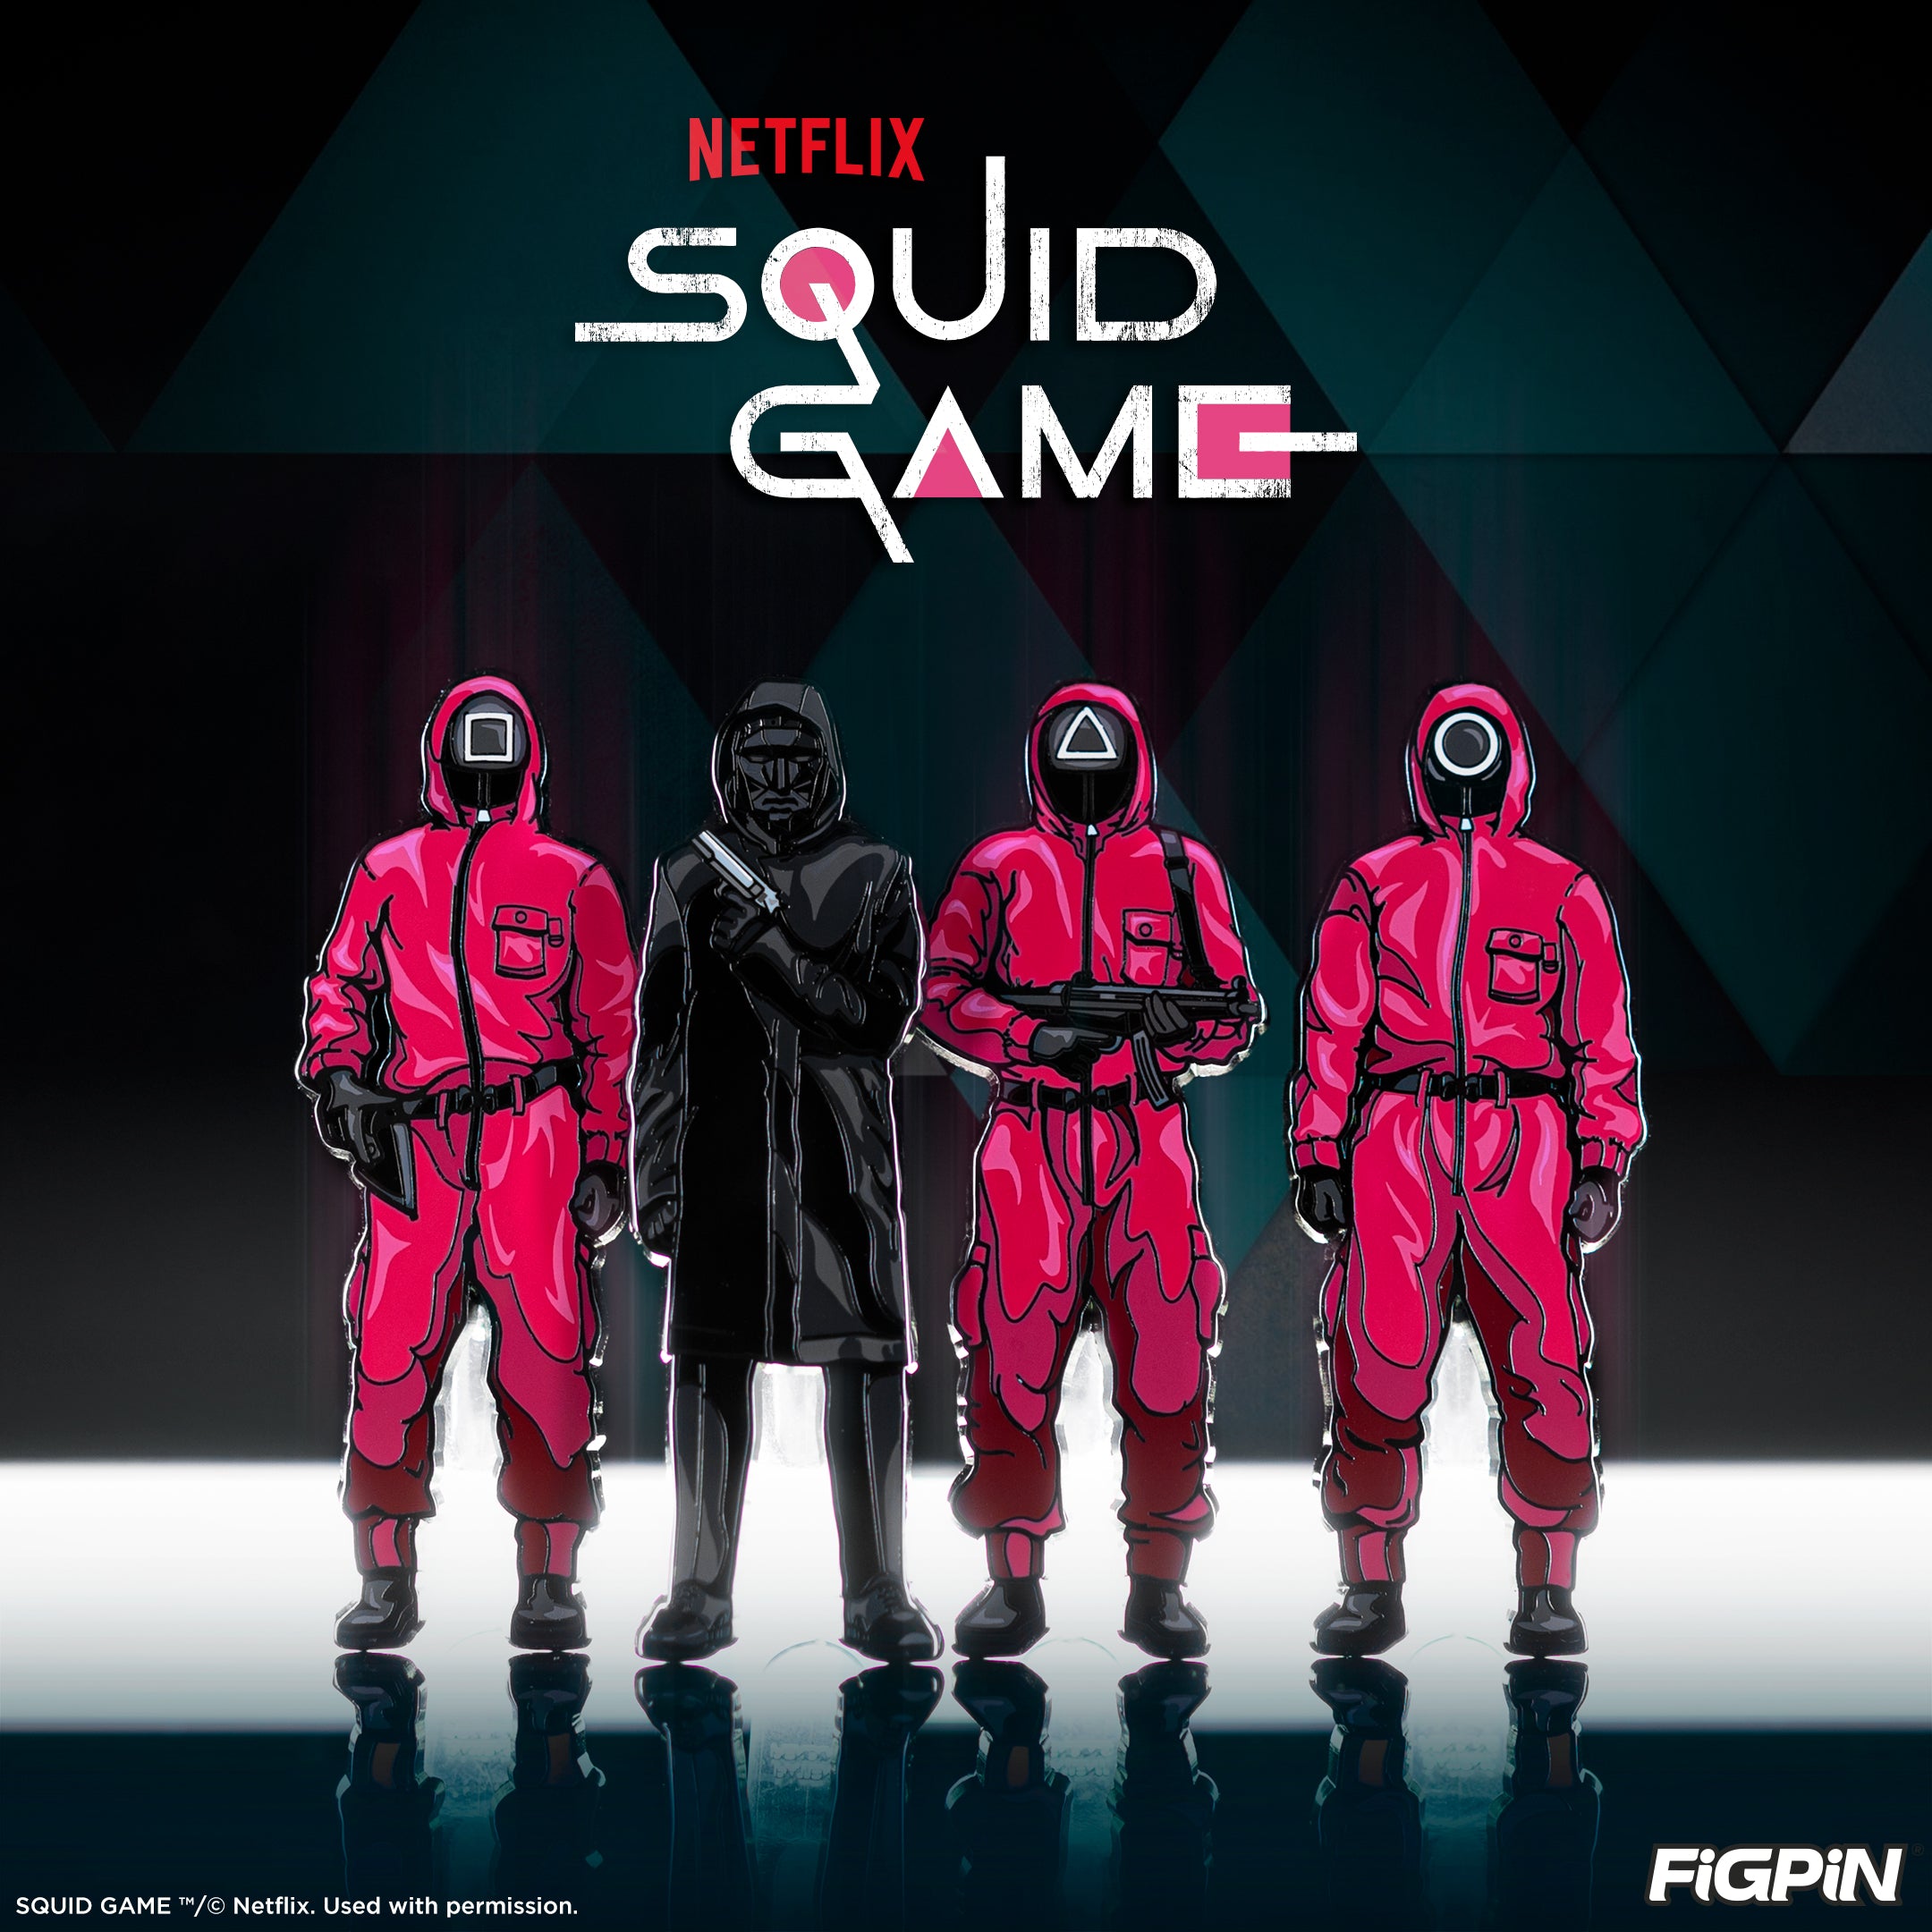 Netflix's Squid Game FiGPiNS are going to Walmart